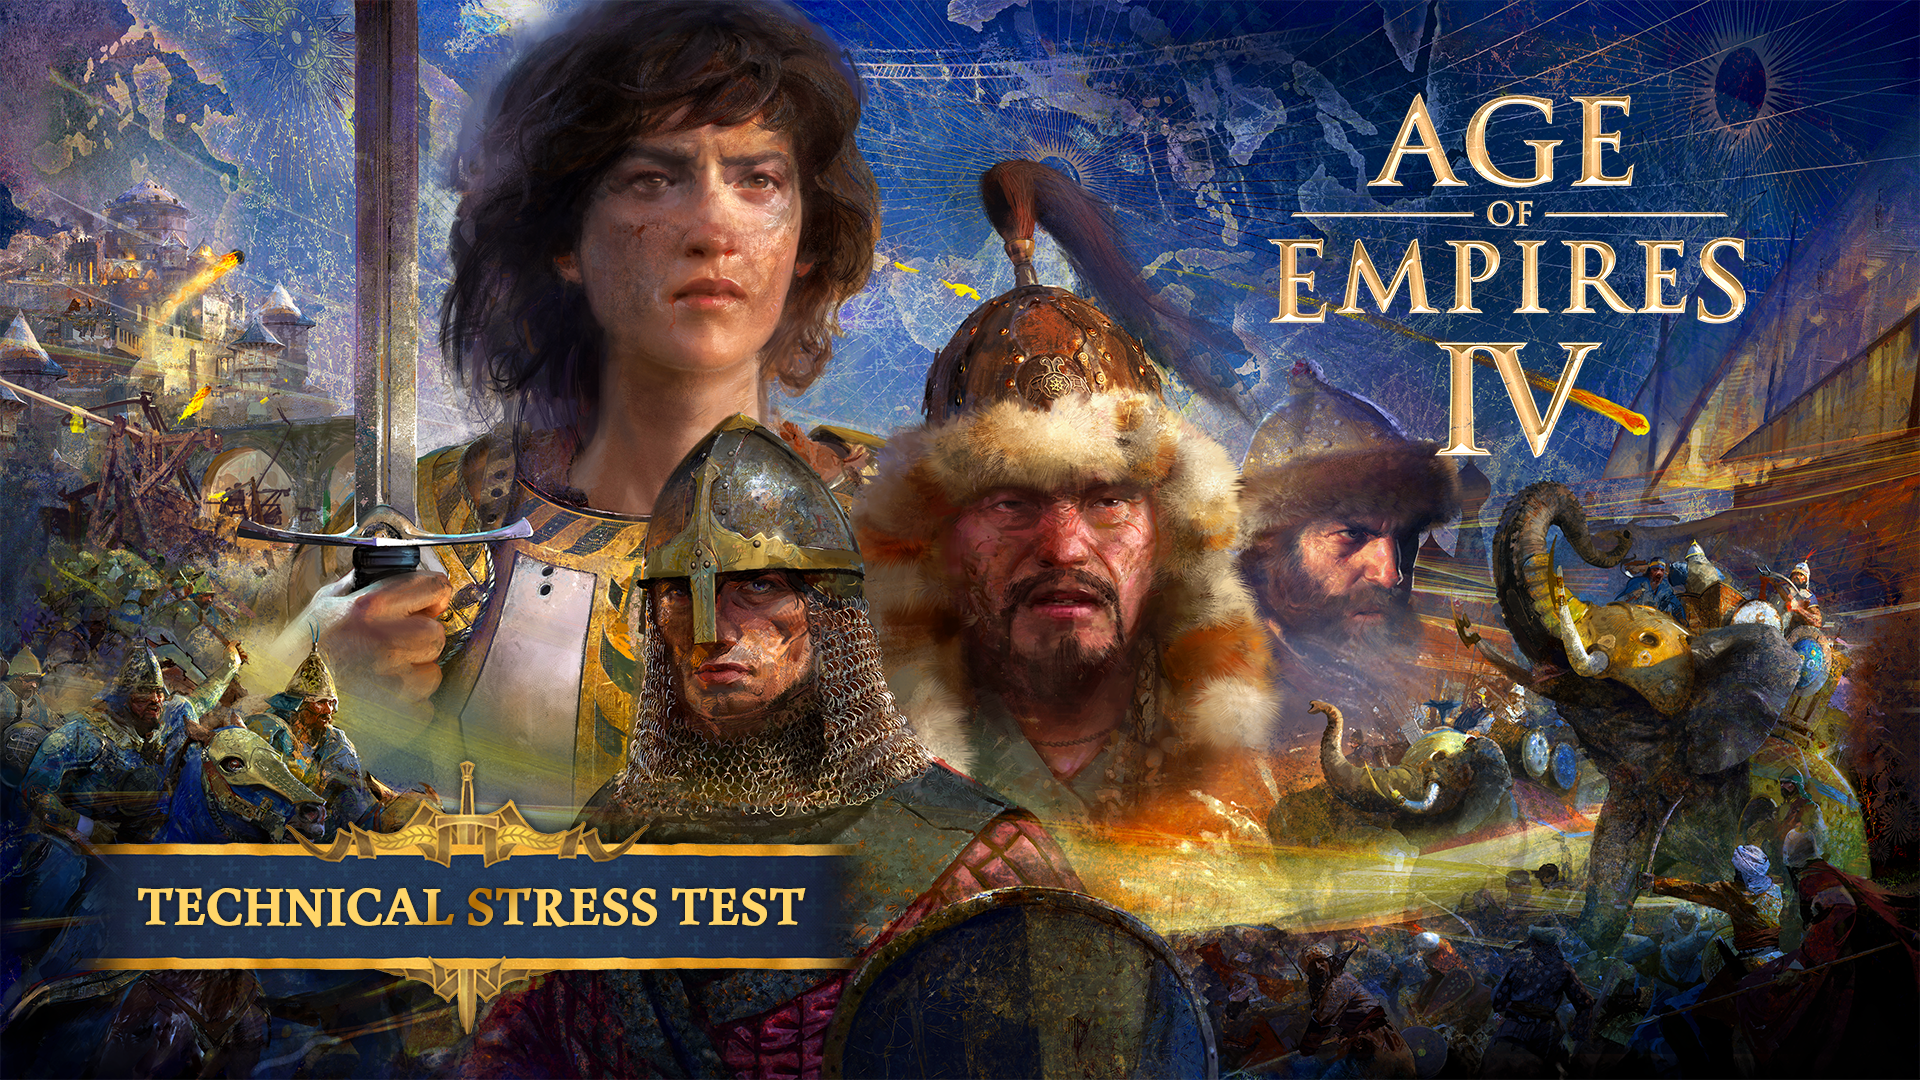 age of empires iv game development started